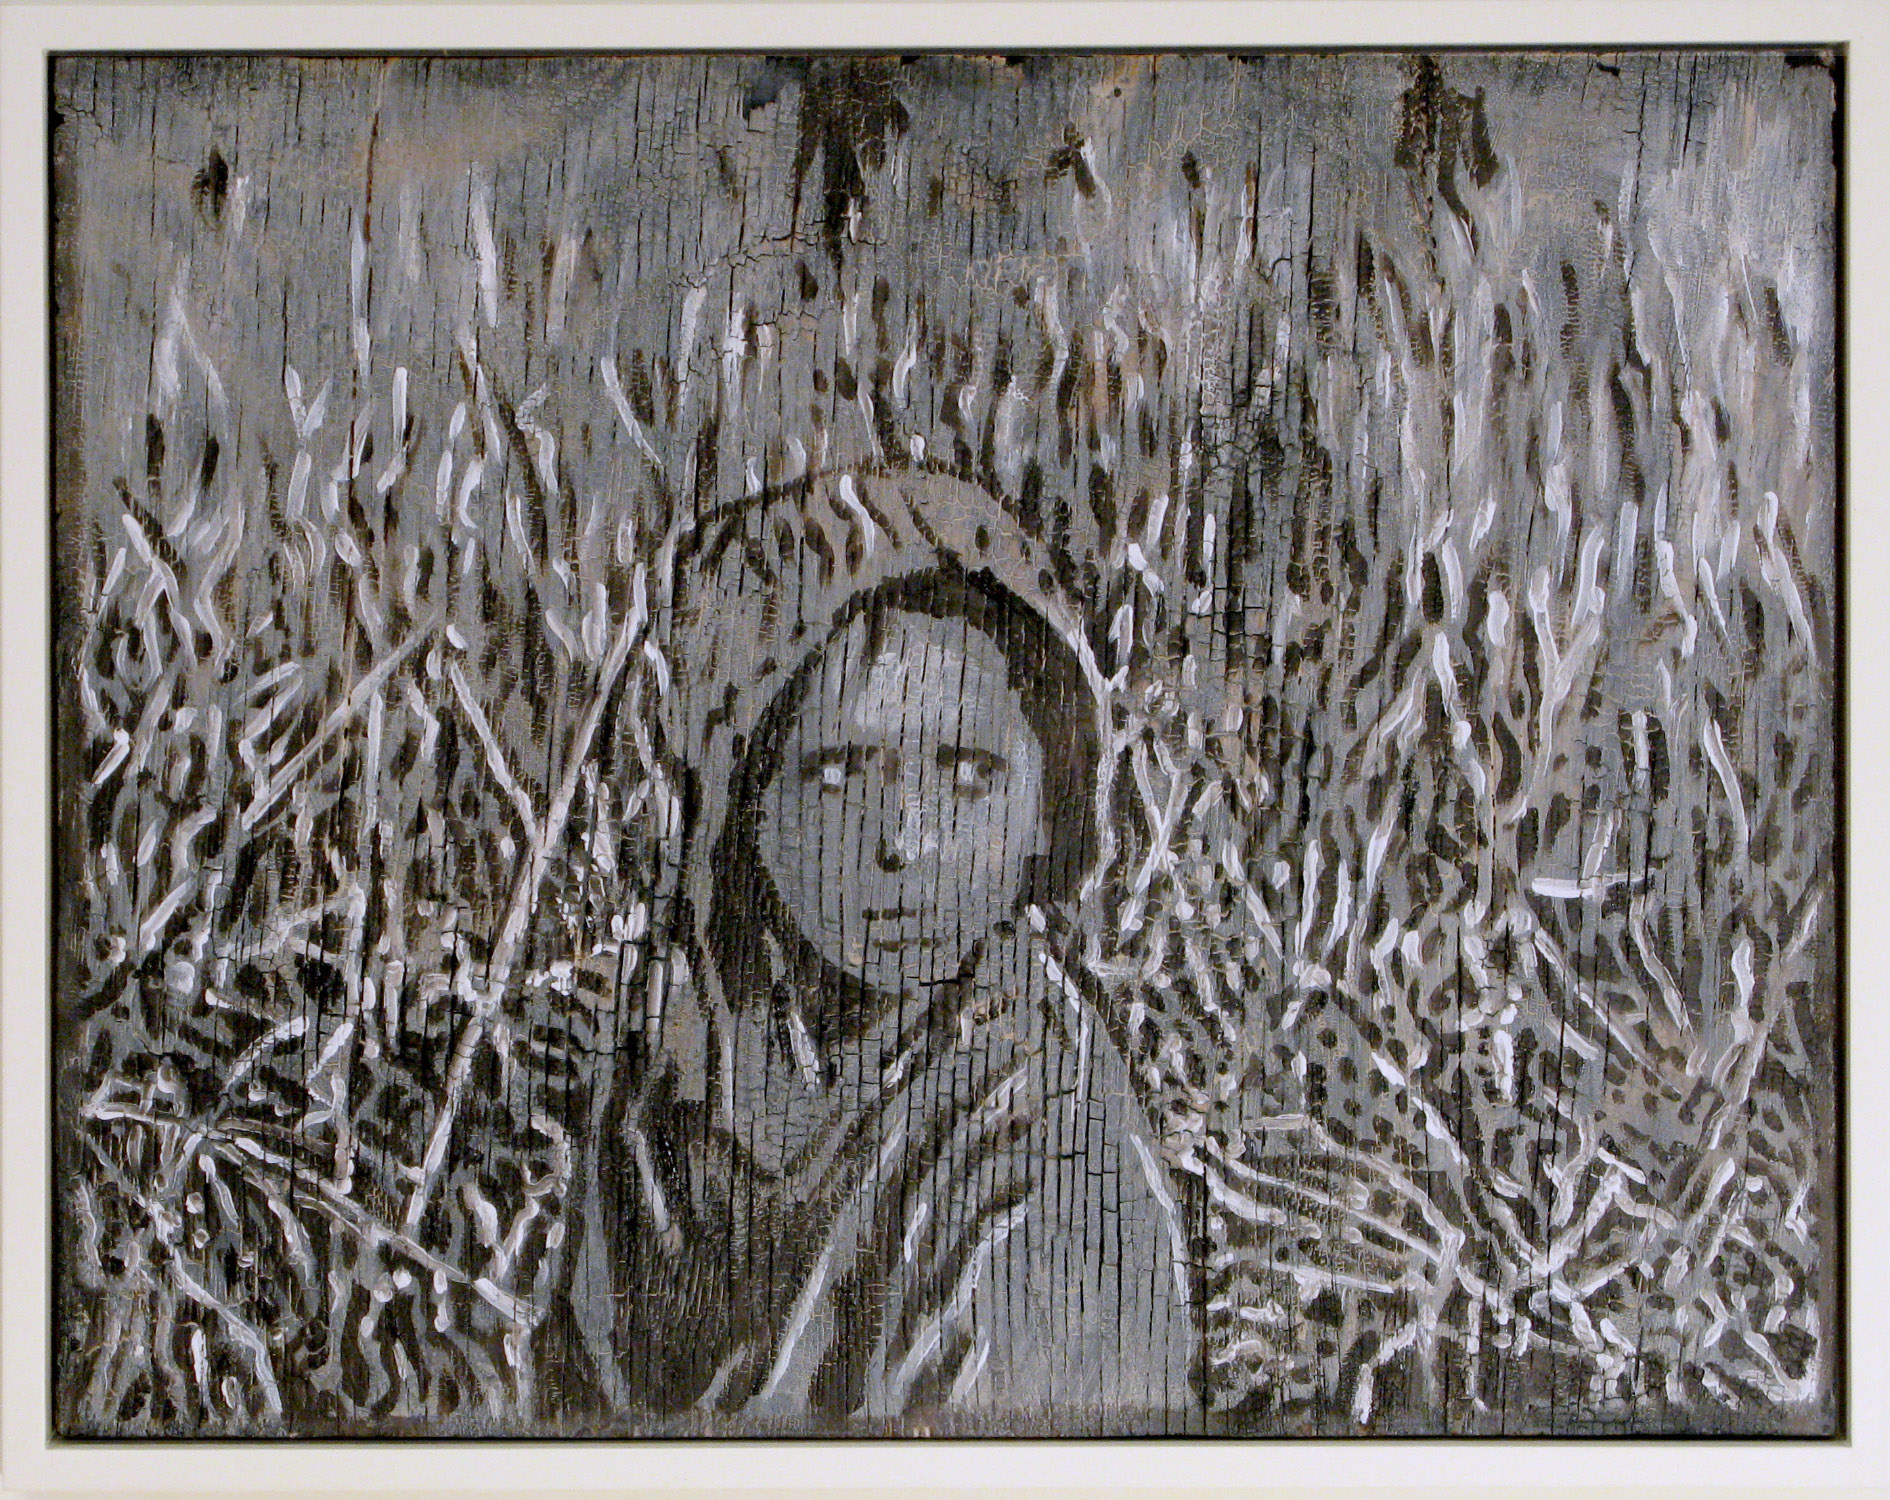 5bl(0) -The Hiding and Seeking, oil, resins on charred wood, 16x22 in. 2009.jpg